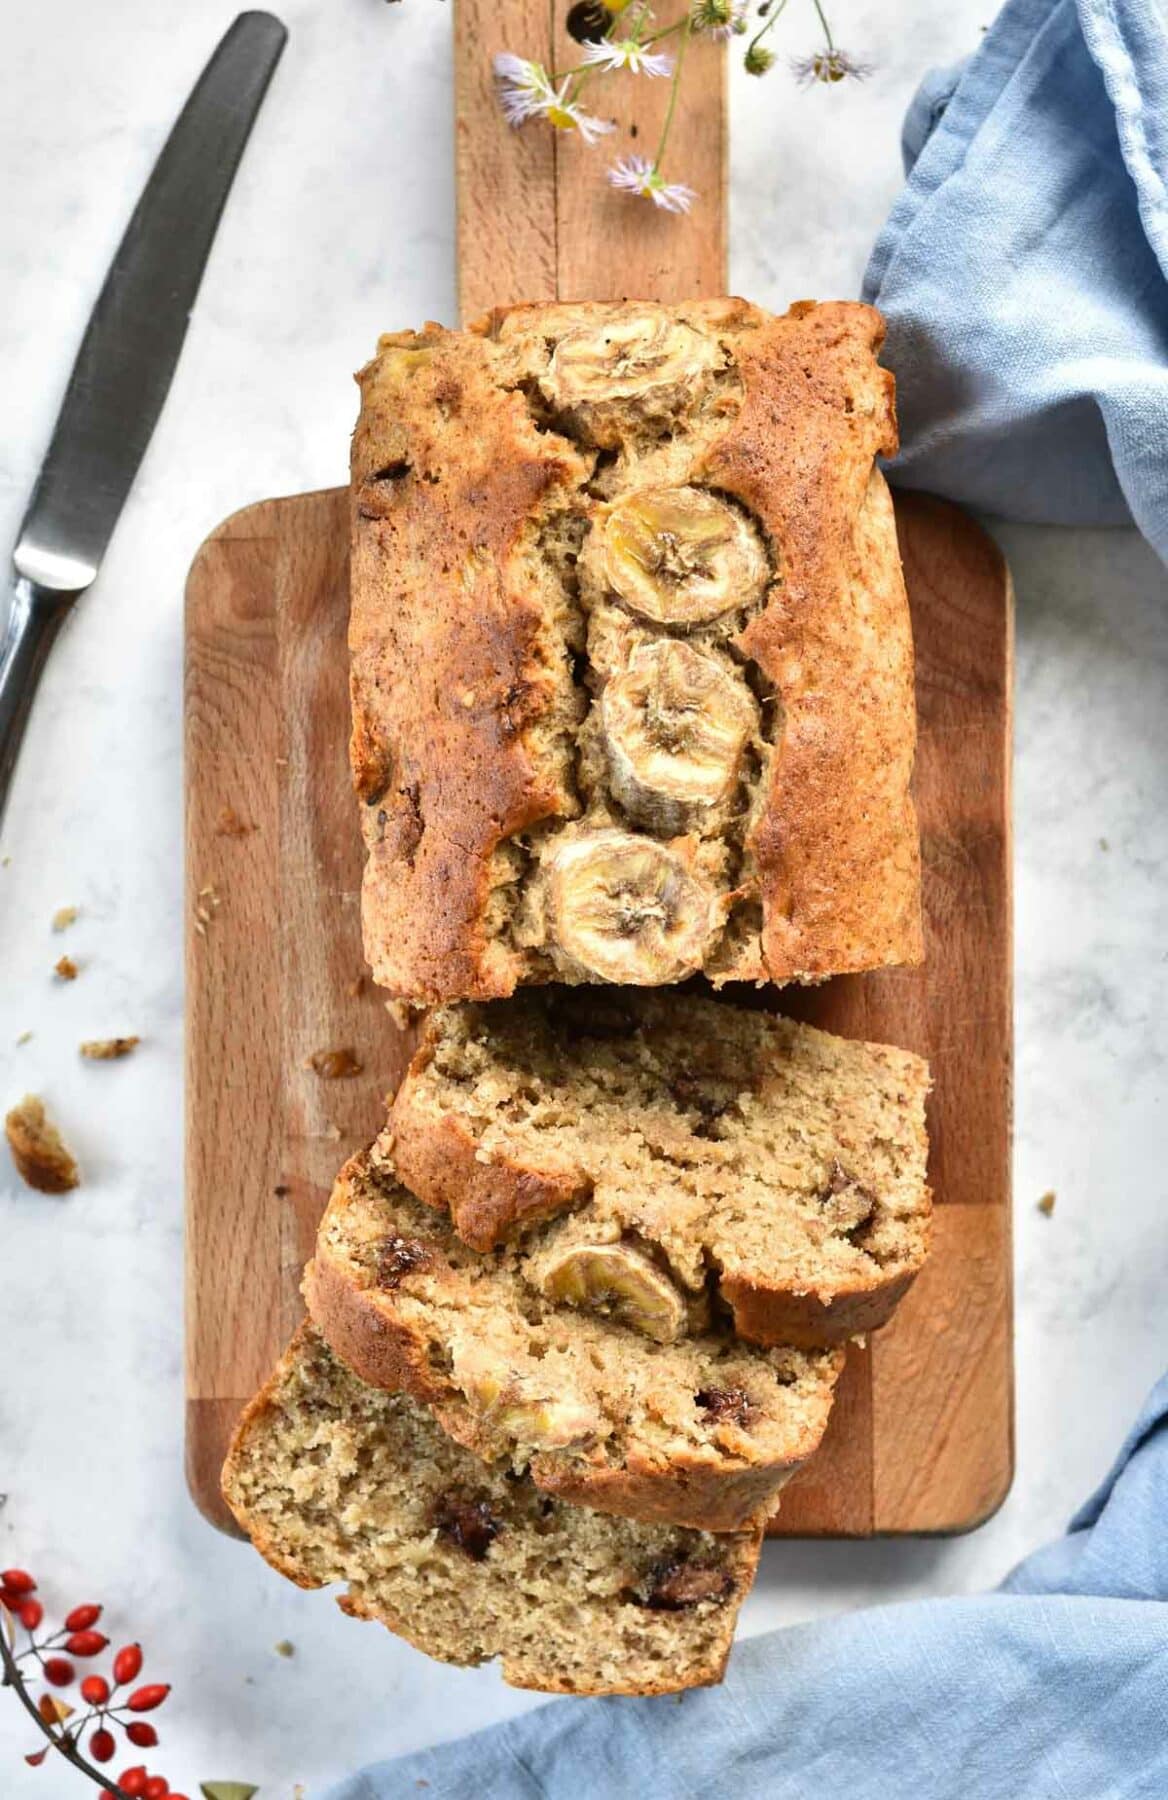 Banana bread with chocolate and walnuts on a chopping board.